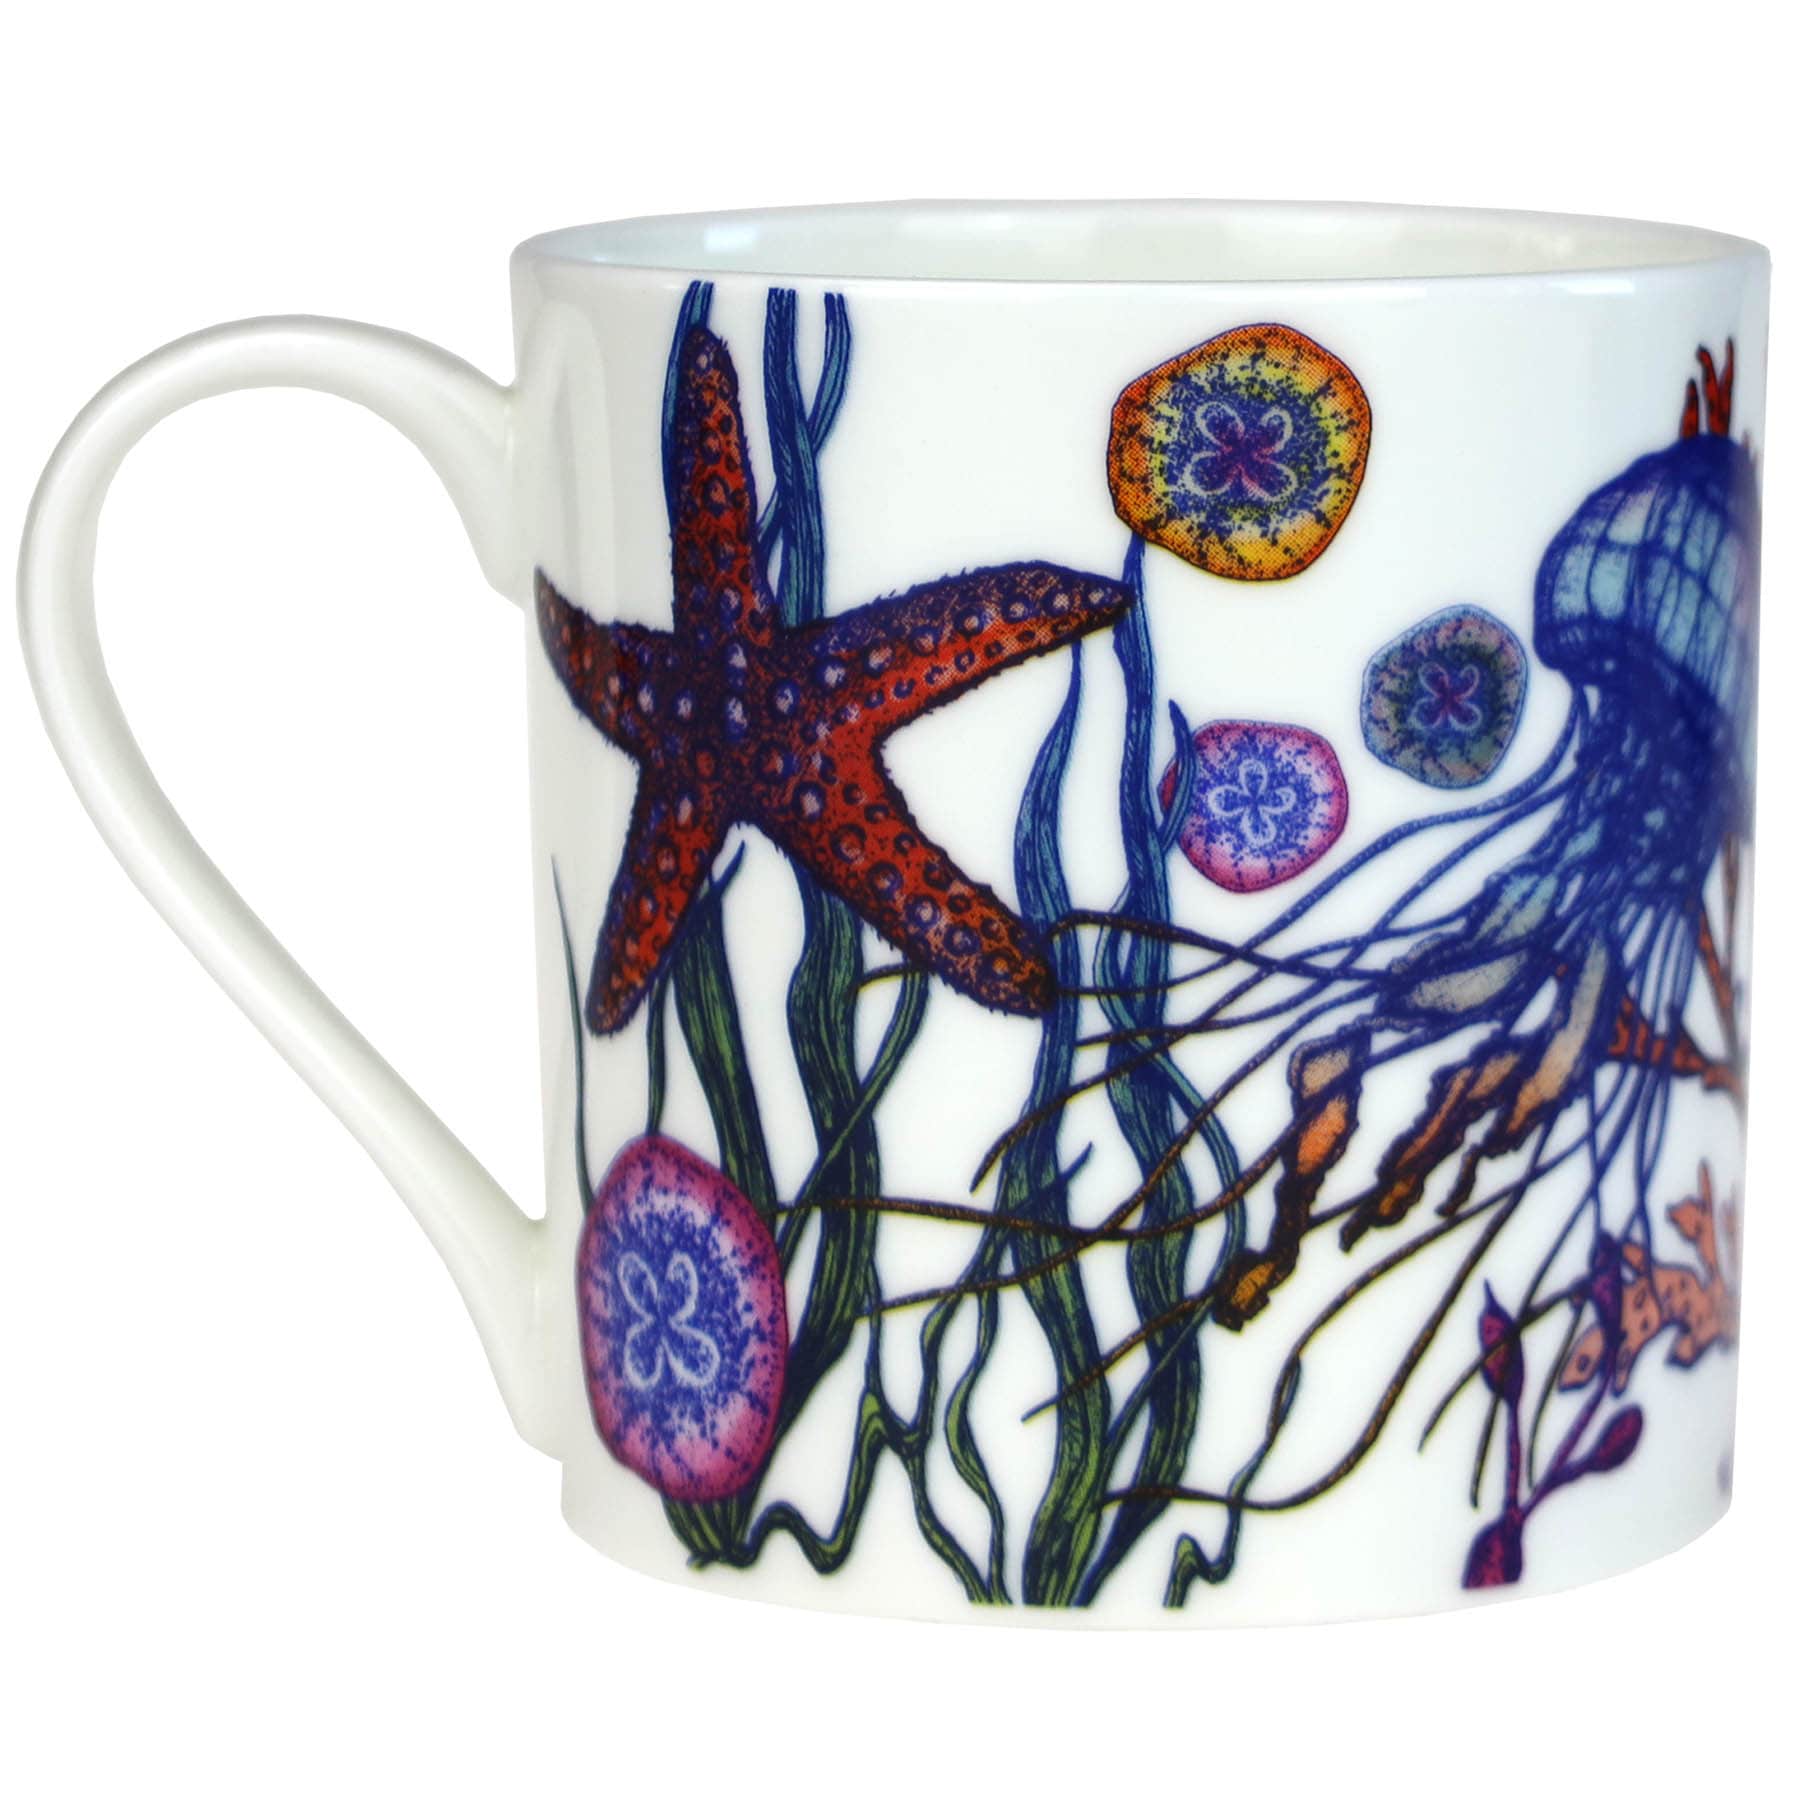 Close up of Image of bone china mug featuring an underwater Reef Design with Octopus, Jellyfish and Starfish .This side show the Starfish and the Jellyfish